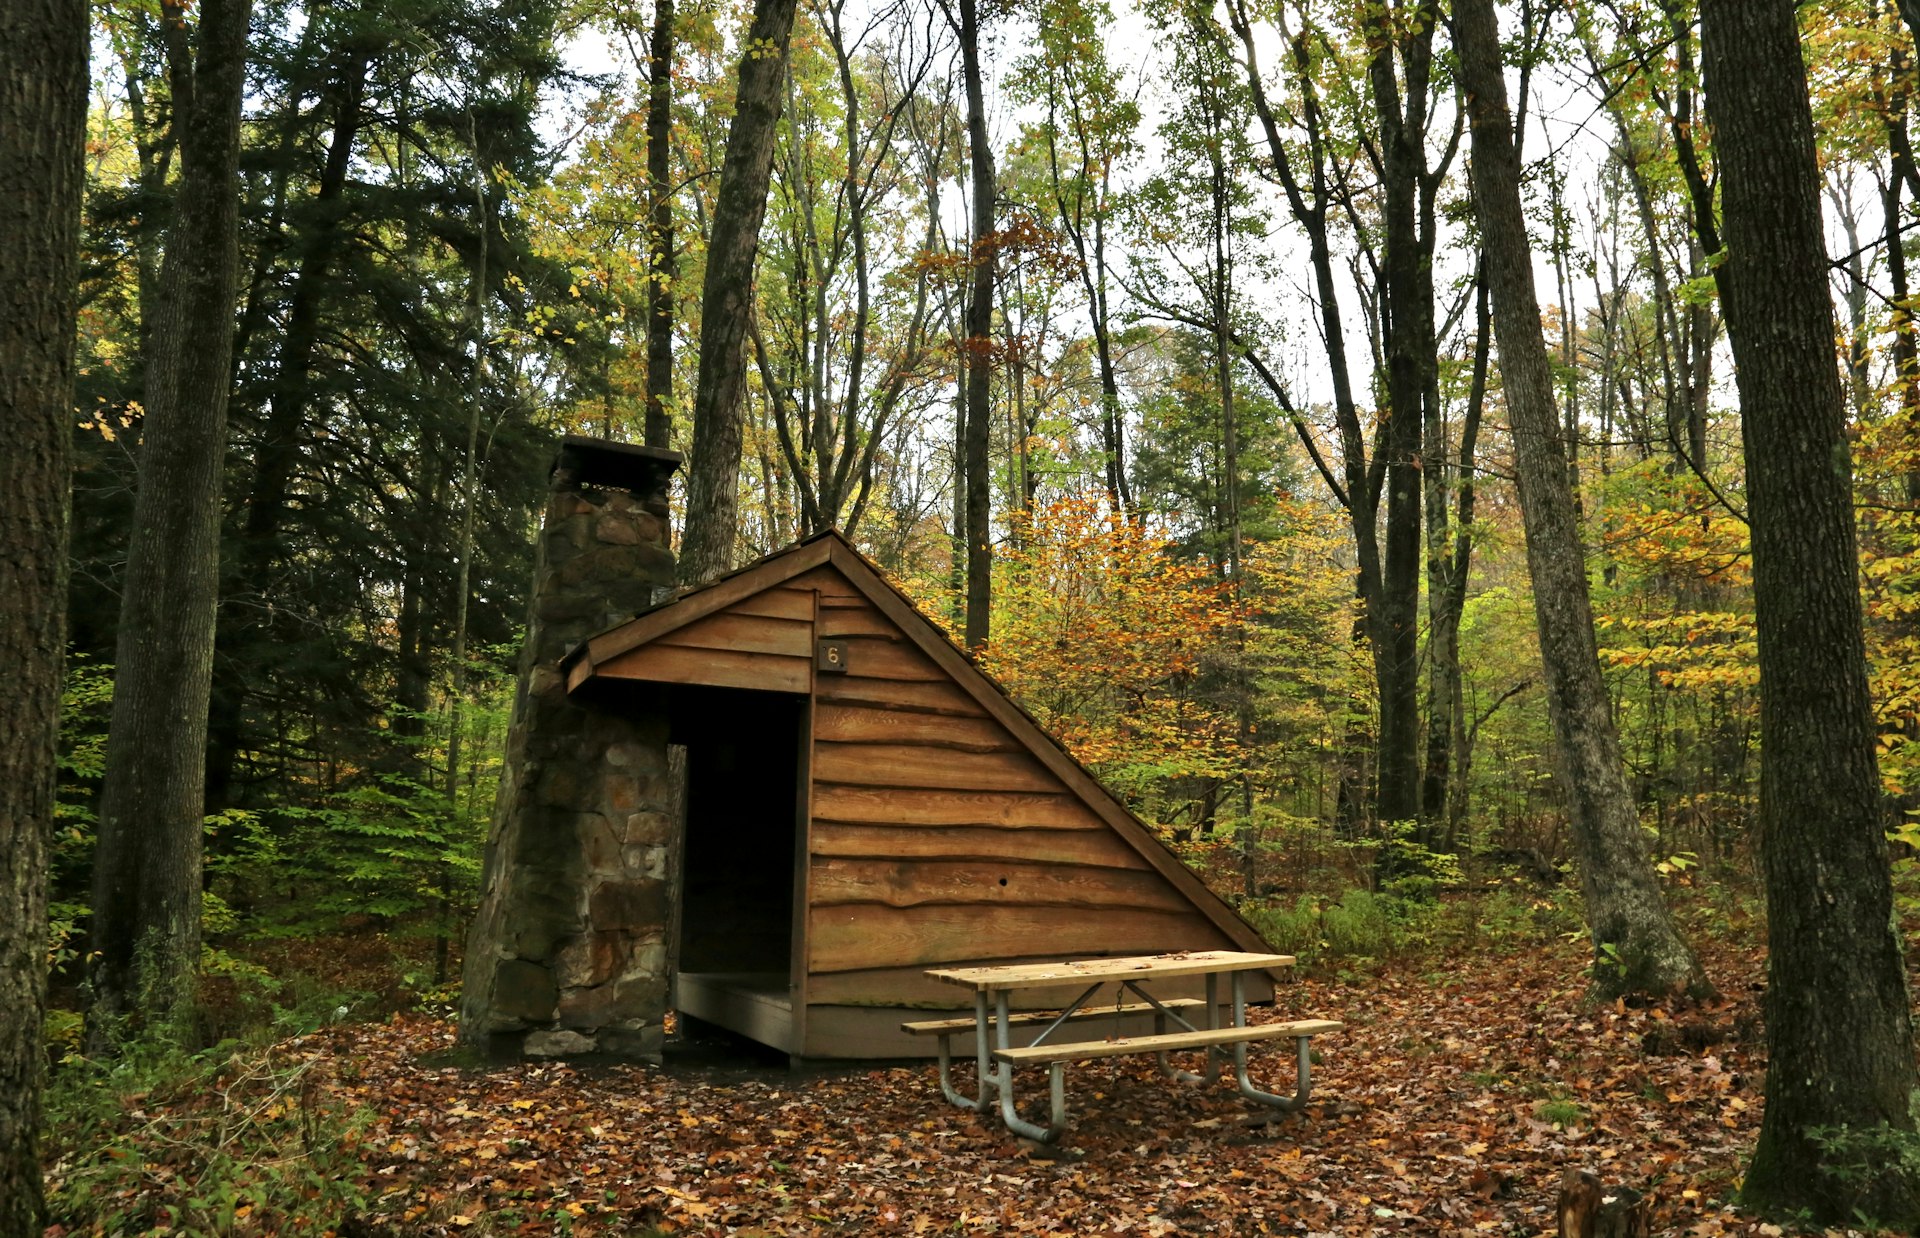 Wooden Adirondack backpackers shelter in a wooded area in Oil Creek State Park in Pennsylvania.